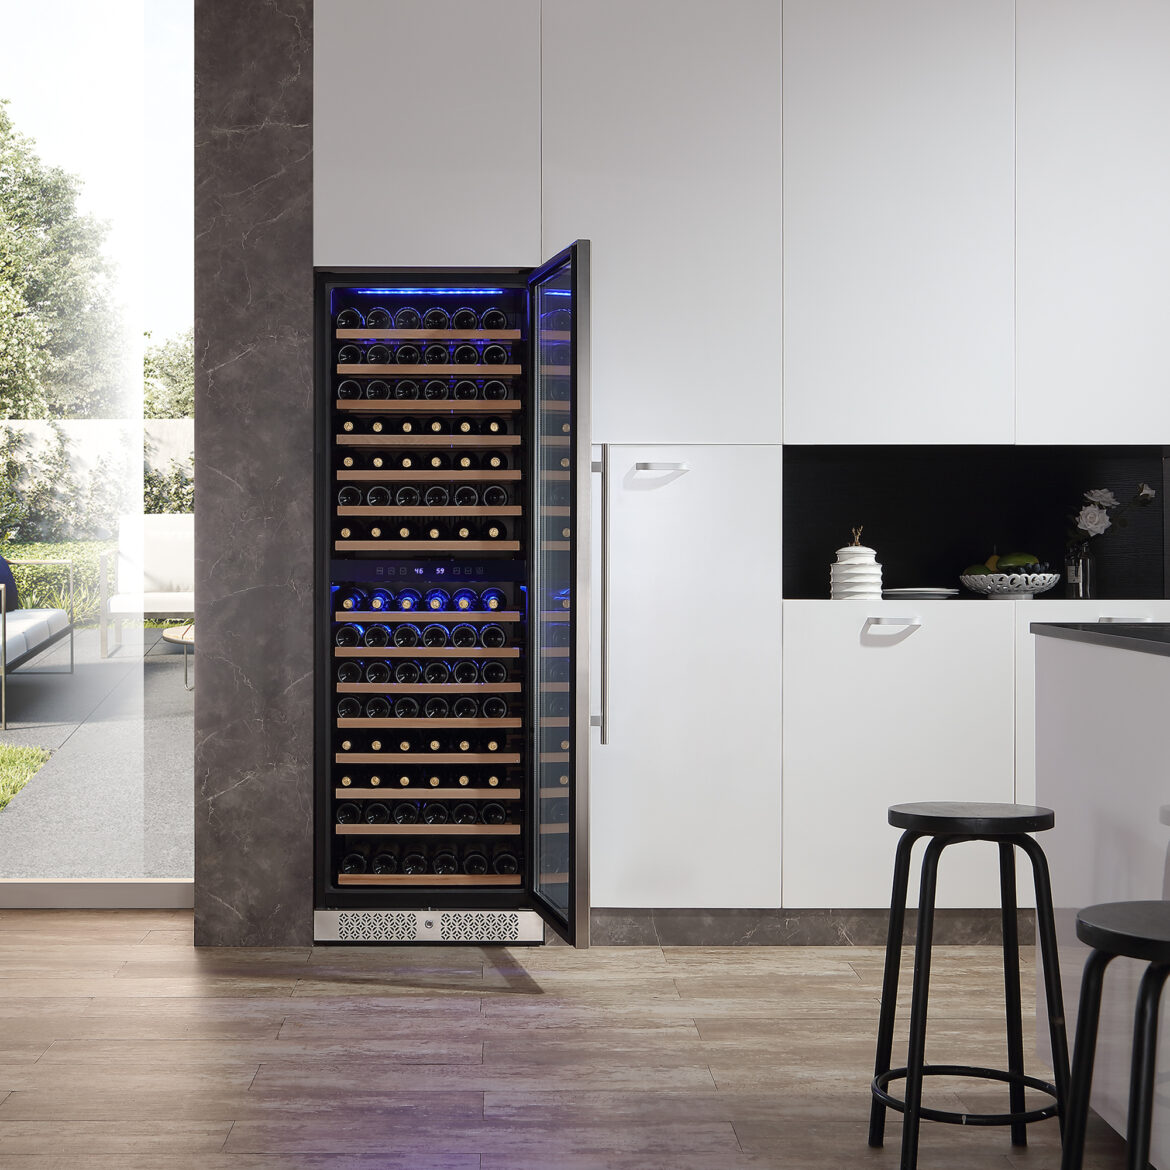 What factors should you consider while shopping for a wine refrigerator?